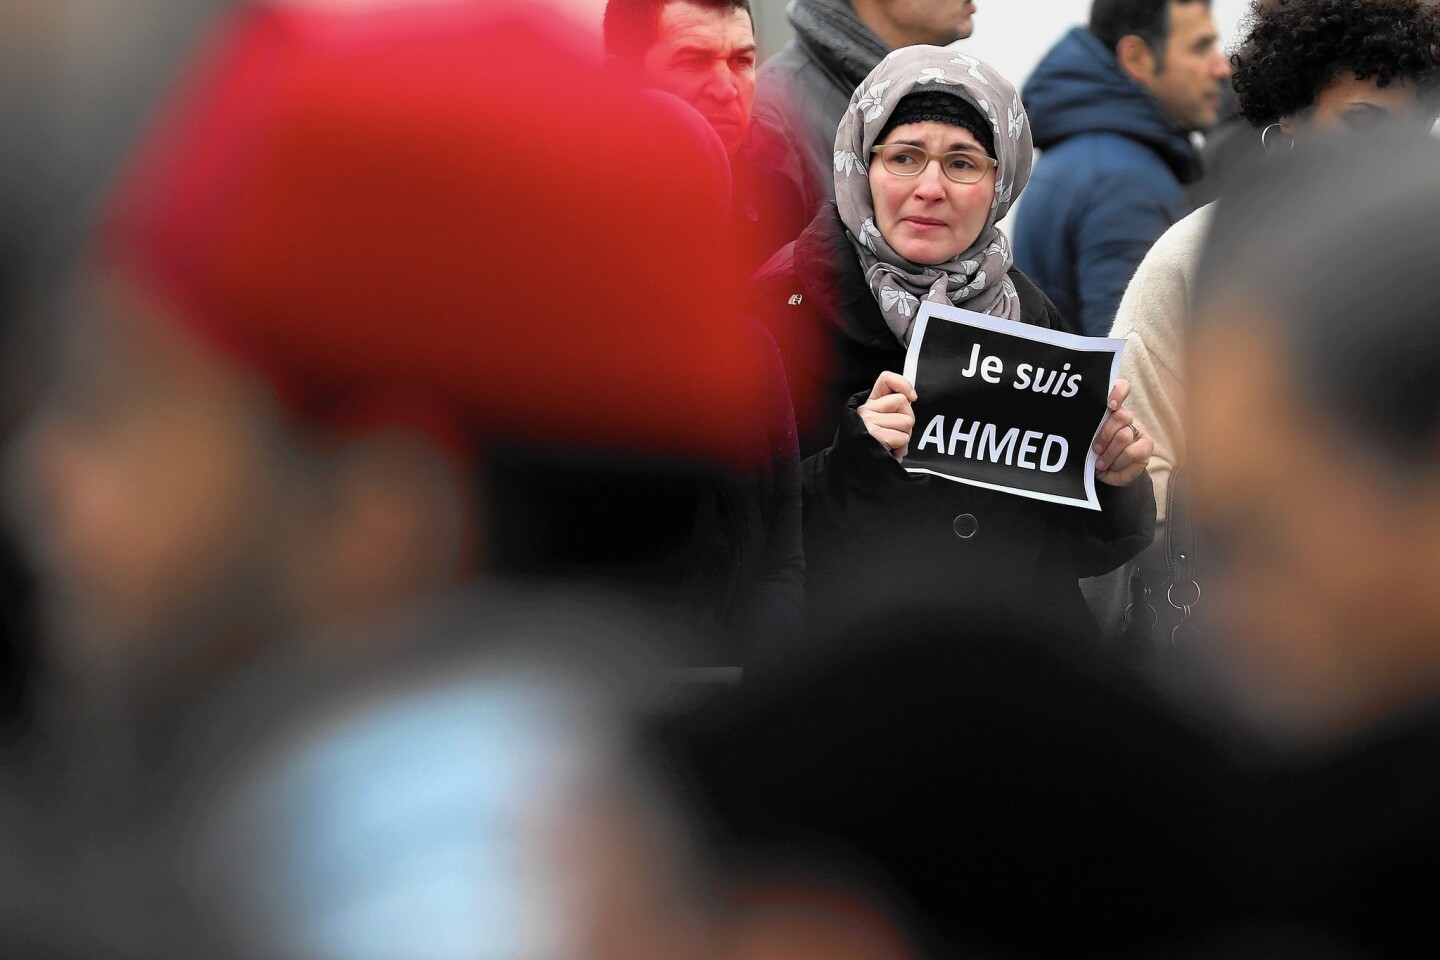 A mourner holds an "I am Ahmed" sign during the funeral of police Officer Ahmed Merabet at a mosque in Bobigny, France. Merabet was killed by terrorists during the attack on Charlie Hebdo magazine.